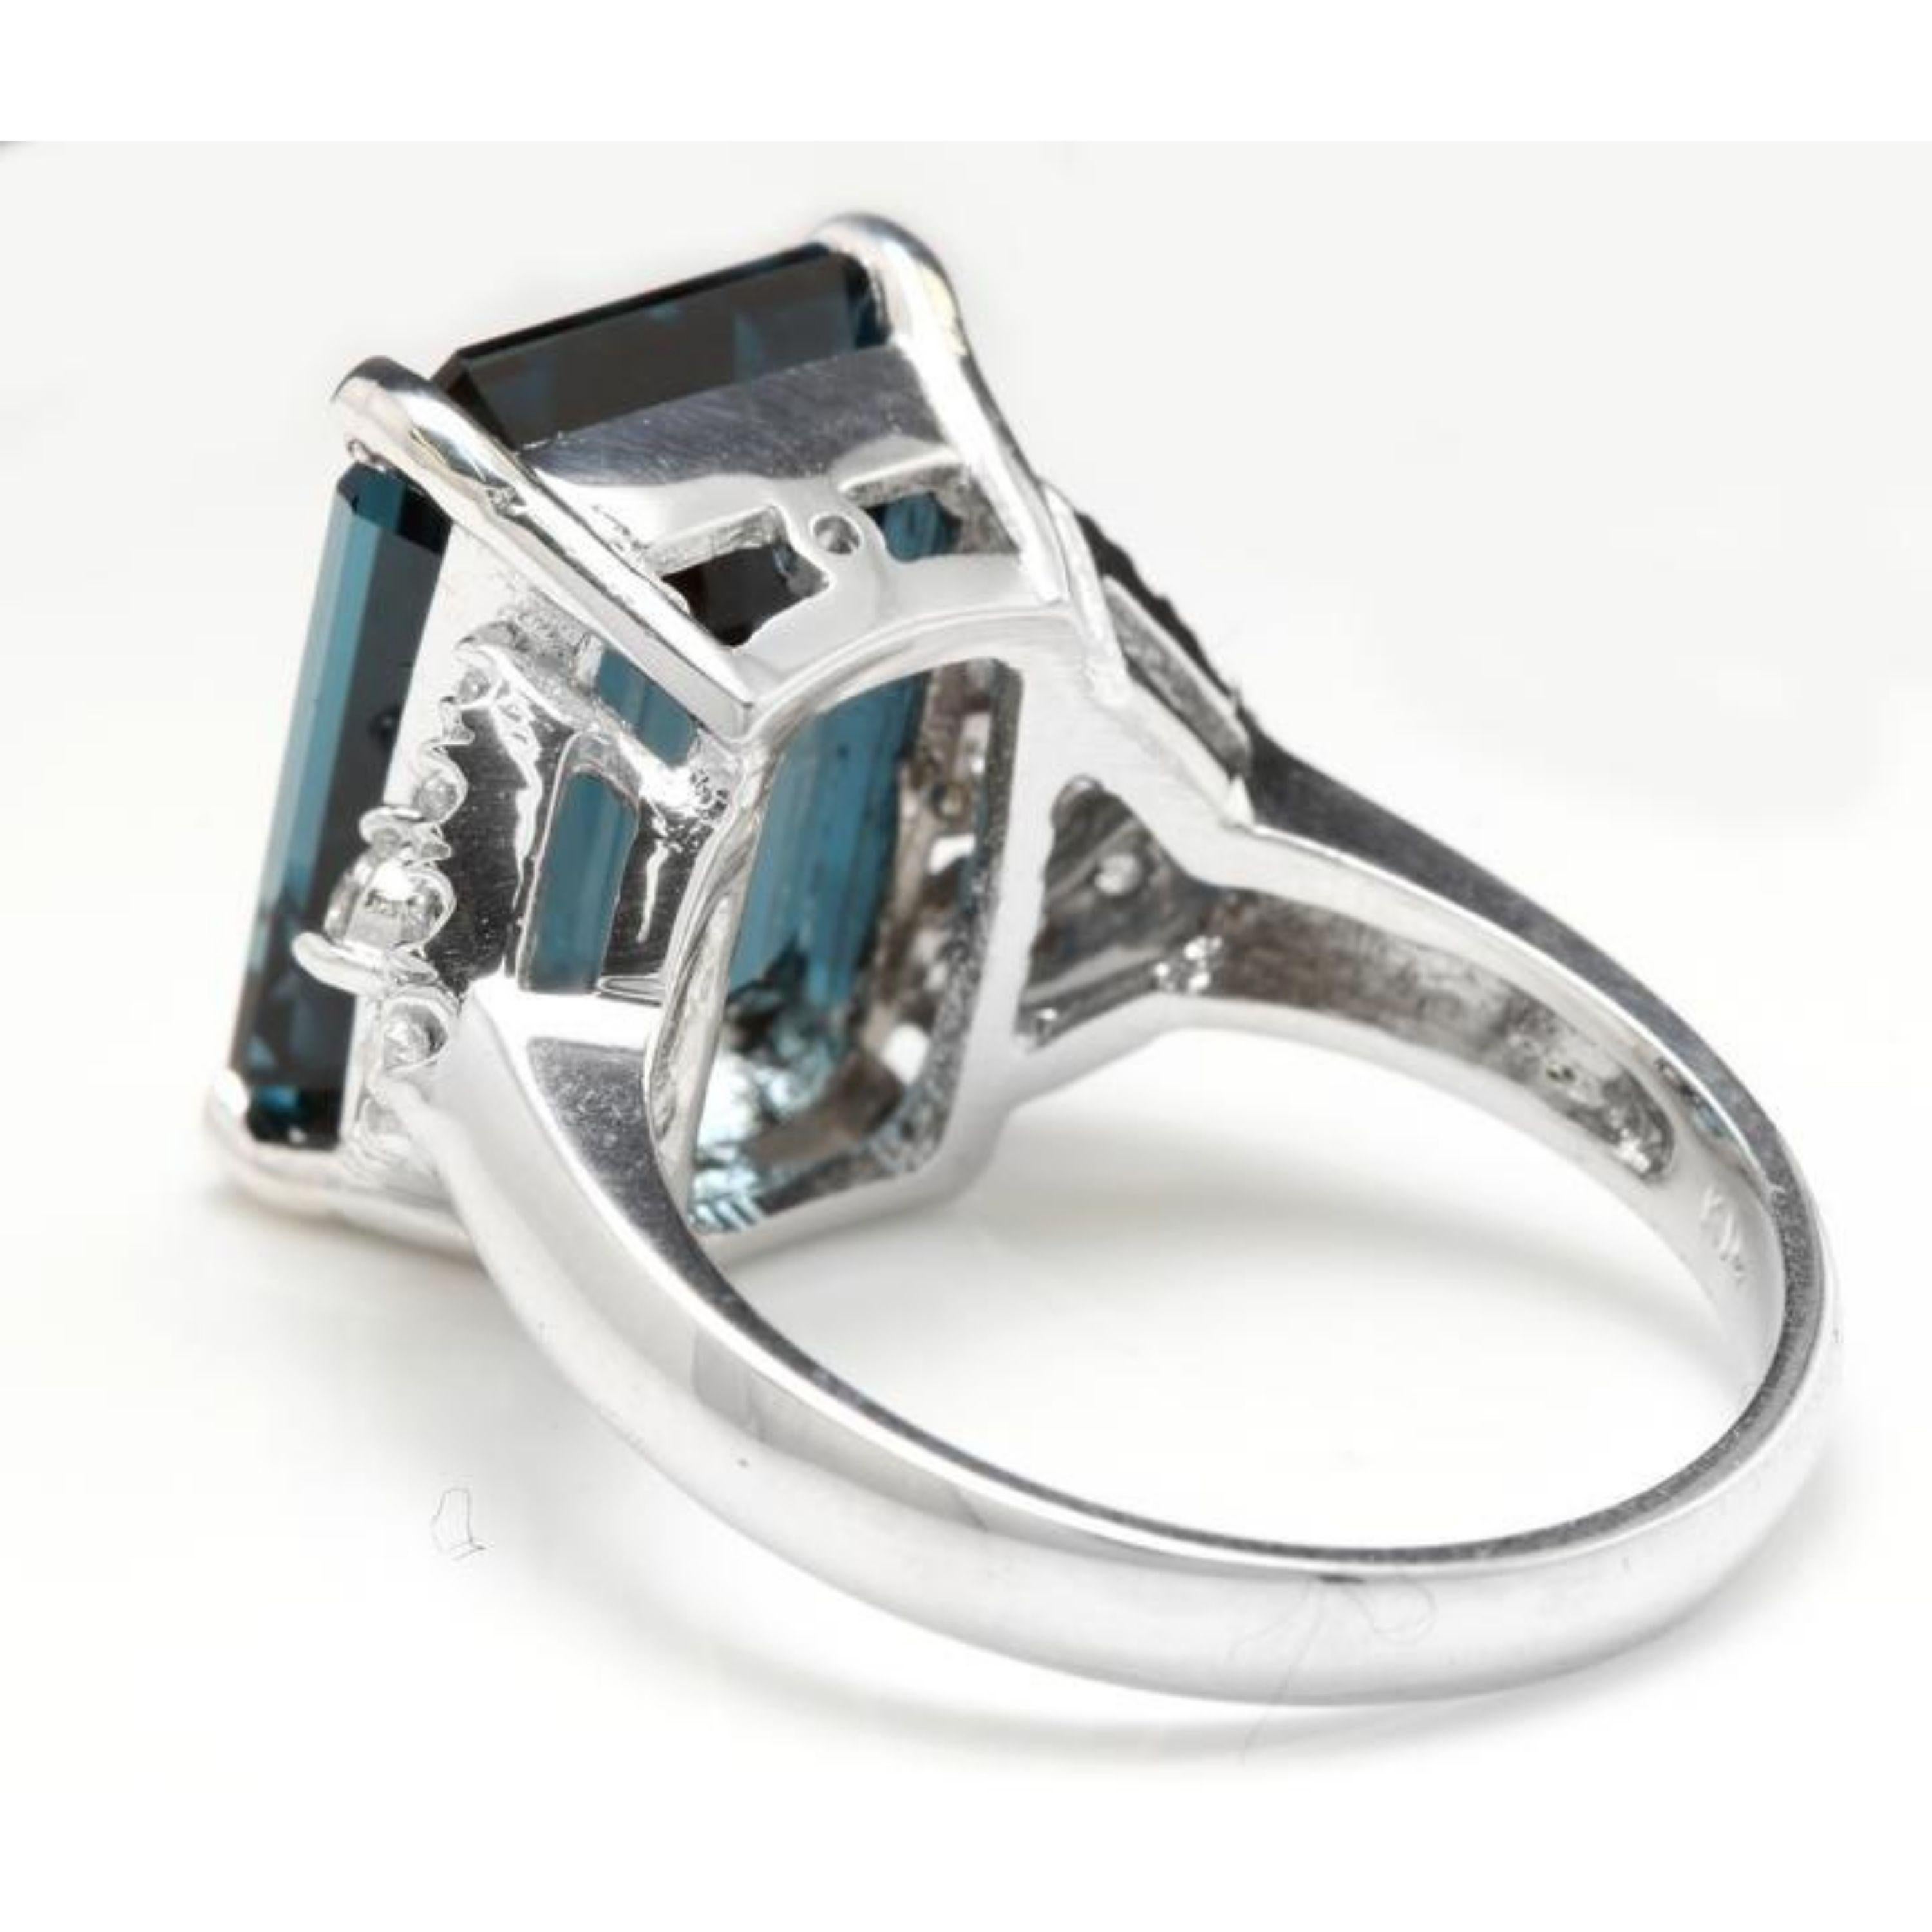 Mixed Cut 15.20 Carat Natural Impressive London Blue Topaz and Diamond 14K White Gold Ring For Sale